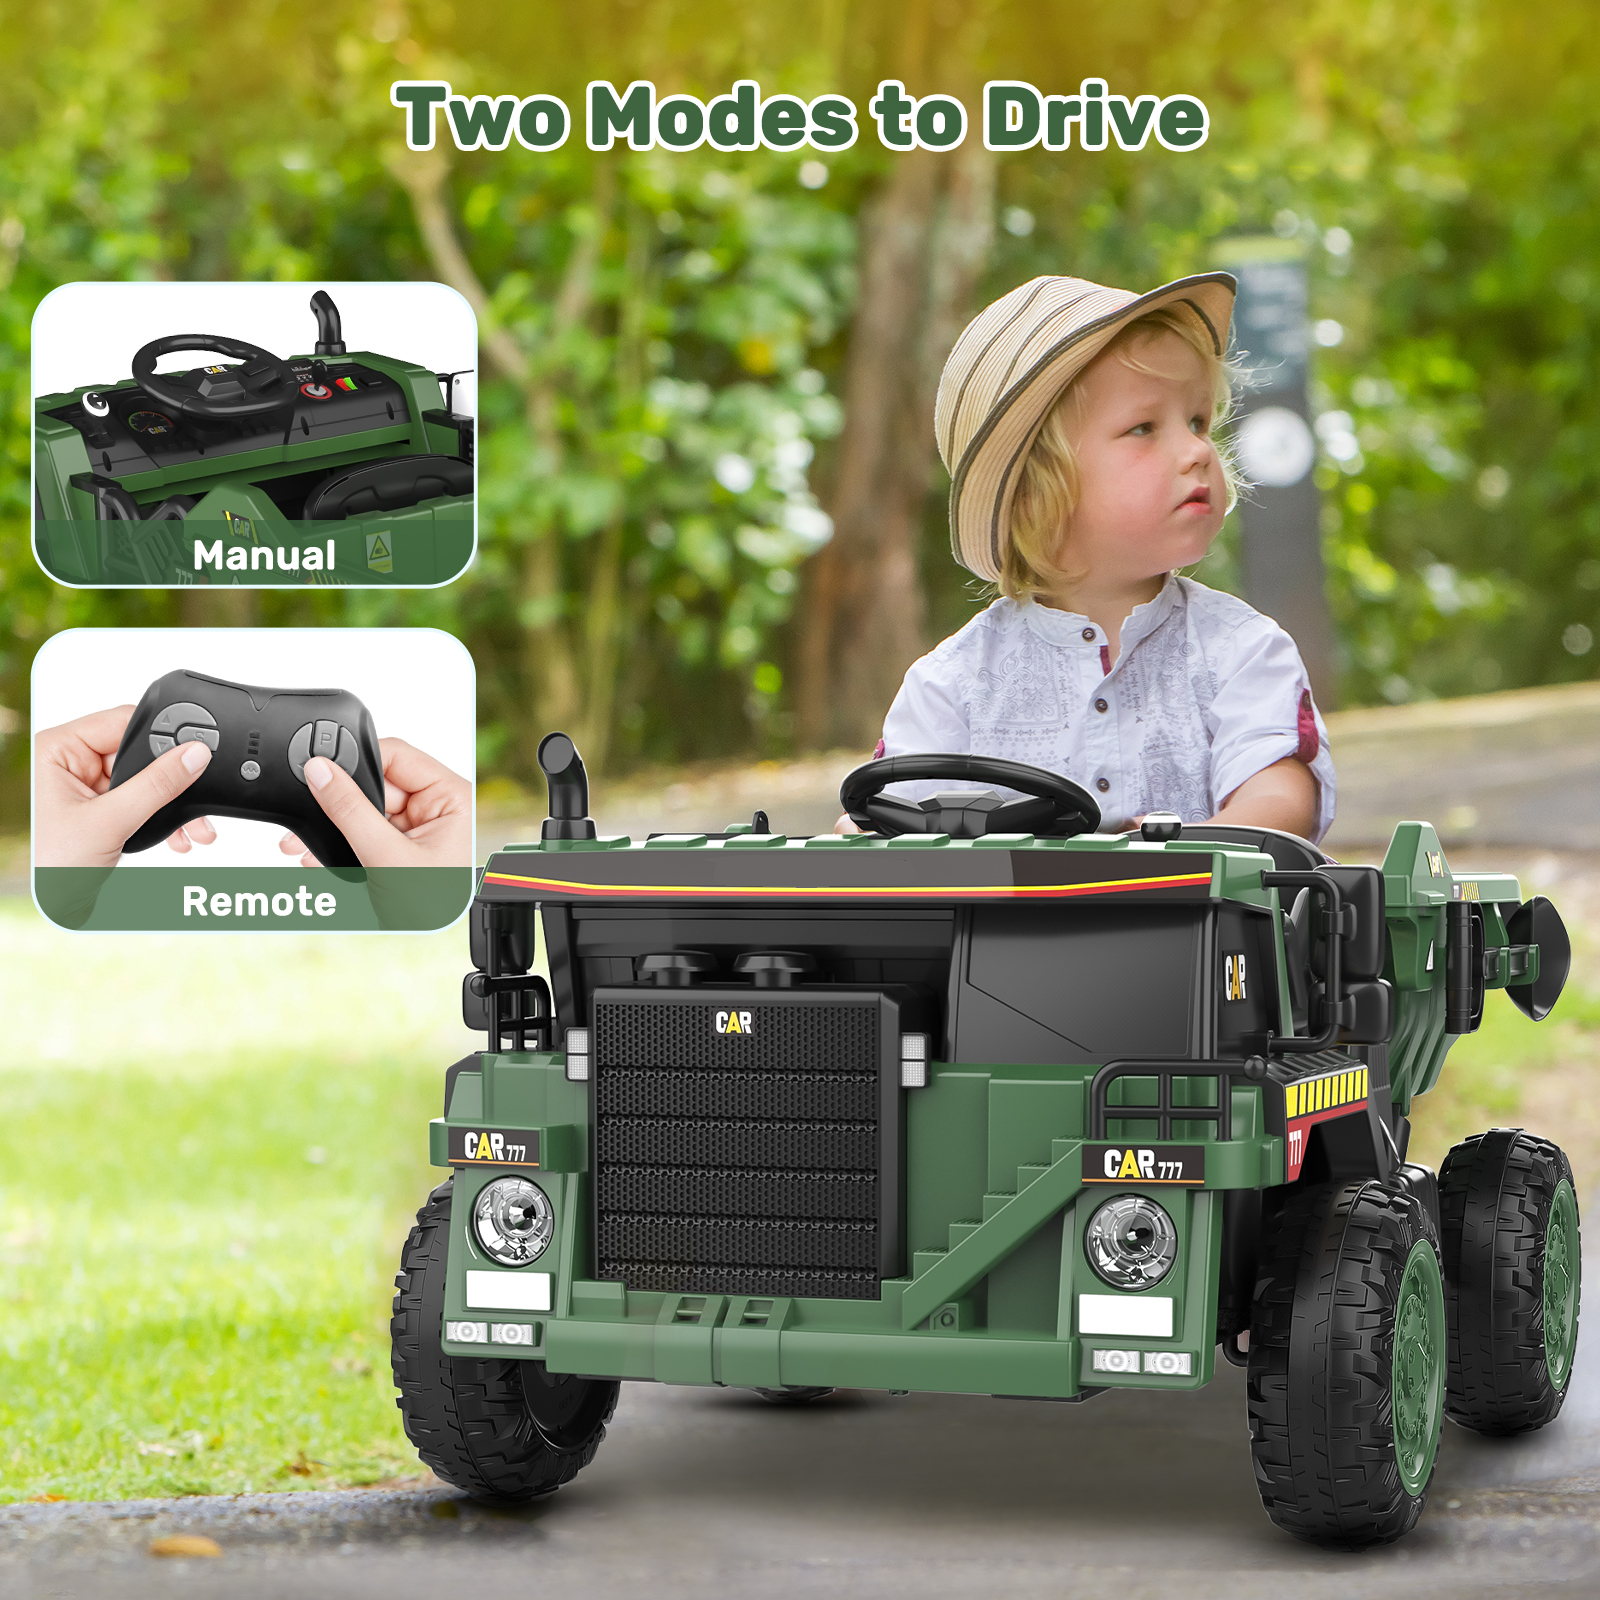 TOKTOO 12V Battery Powered Ride-on Dump Truck with Remote Control, Music Player, Electric Dump Bucket, Kids Tractor-Dark Green - image 5 of 7